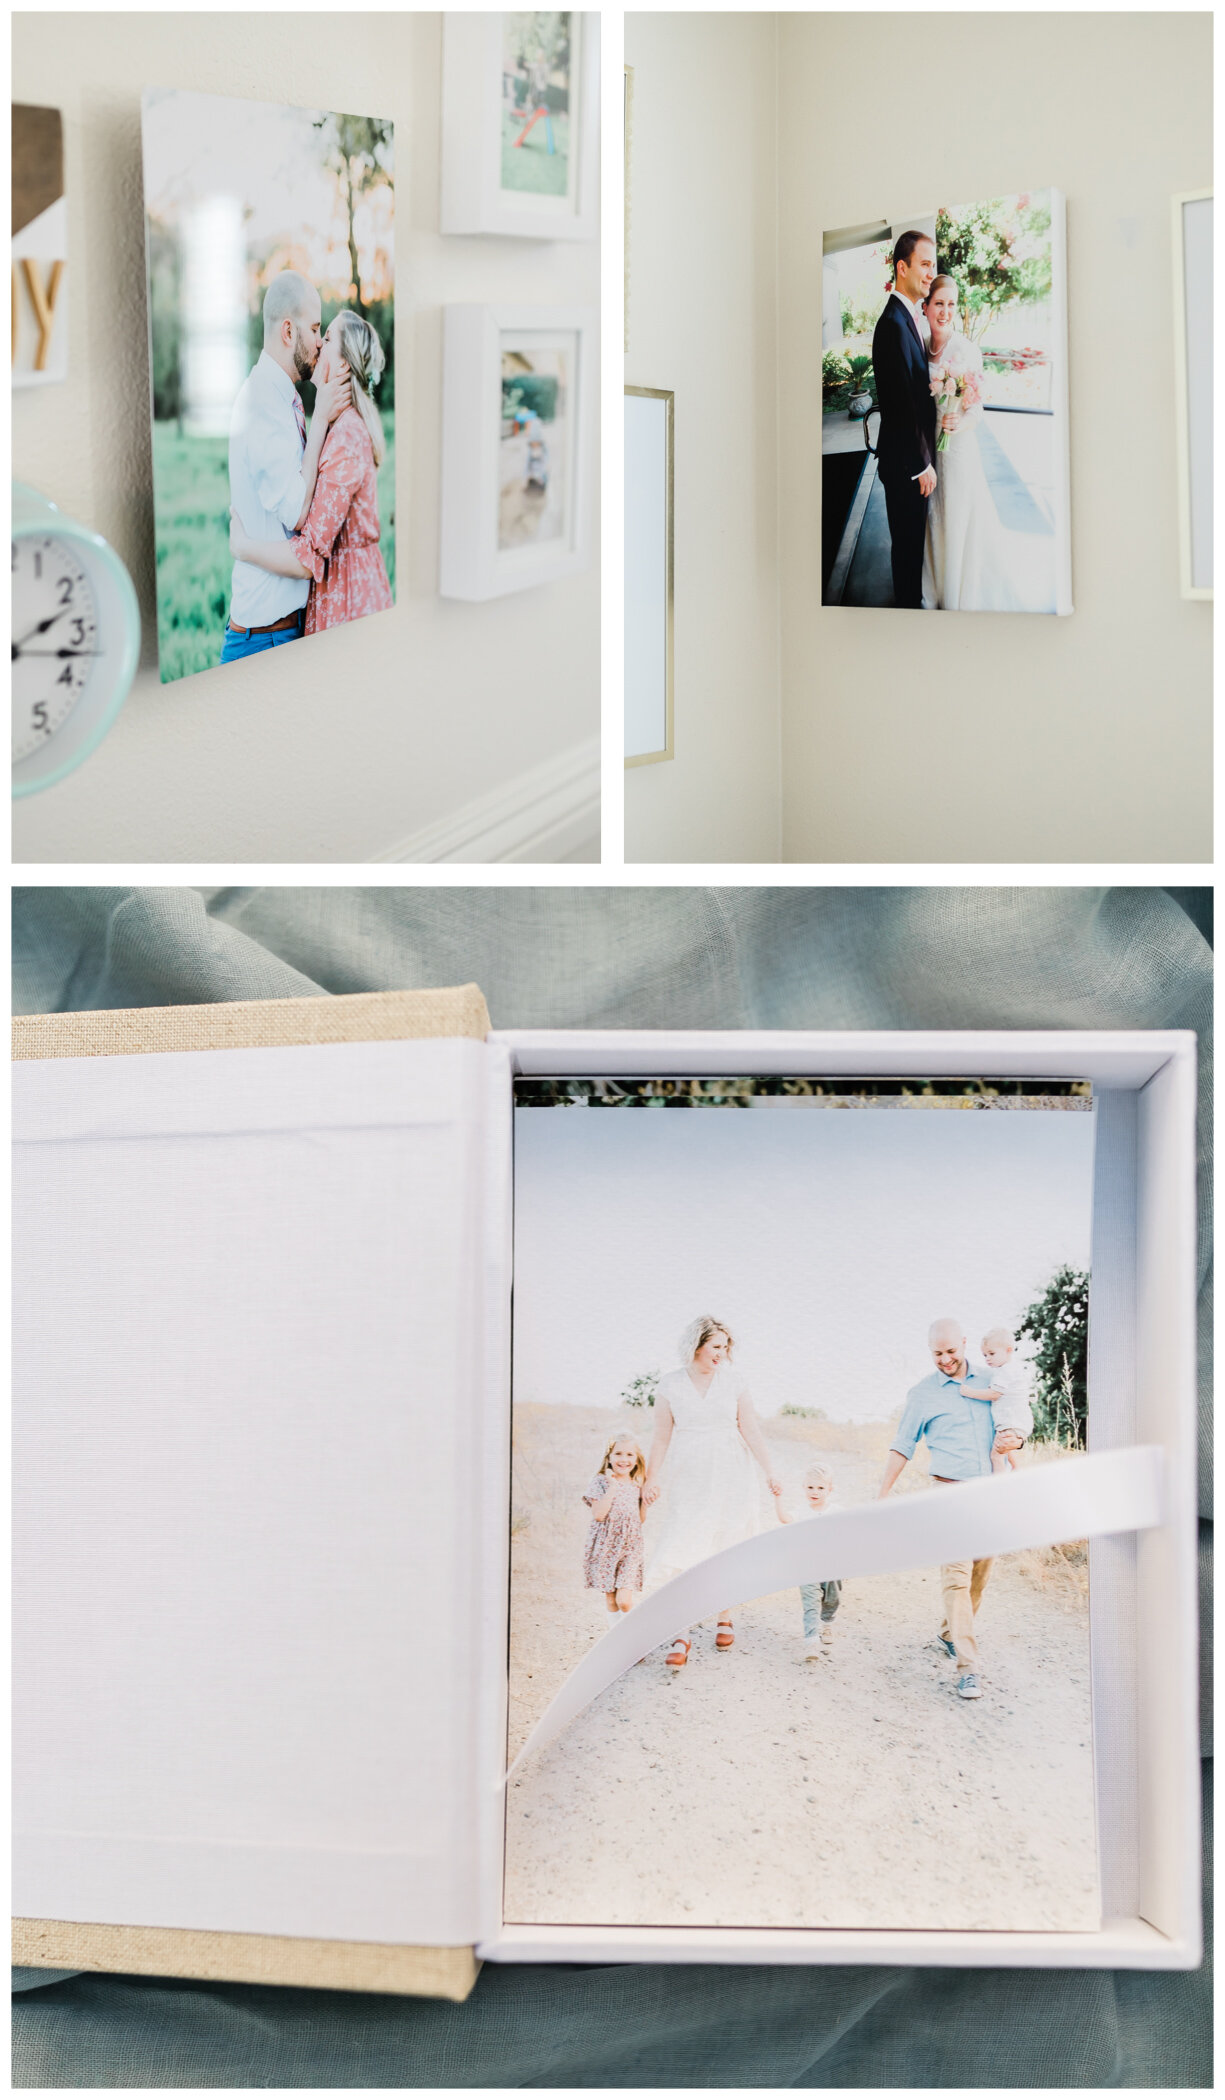 Products shown: High Gloss Metal Print, Fine Art Canvas, Linen wrapped Folio box with fine art prints.